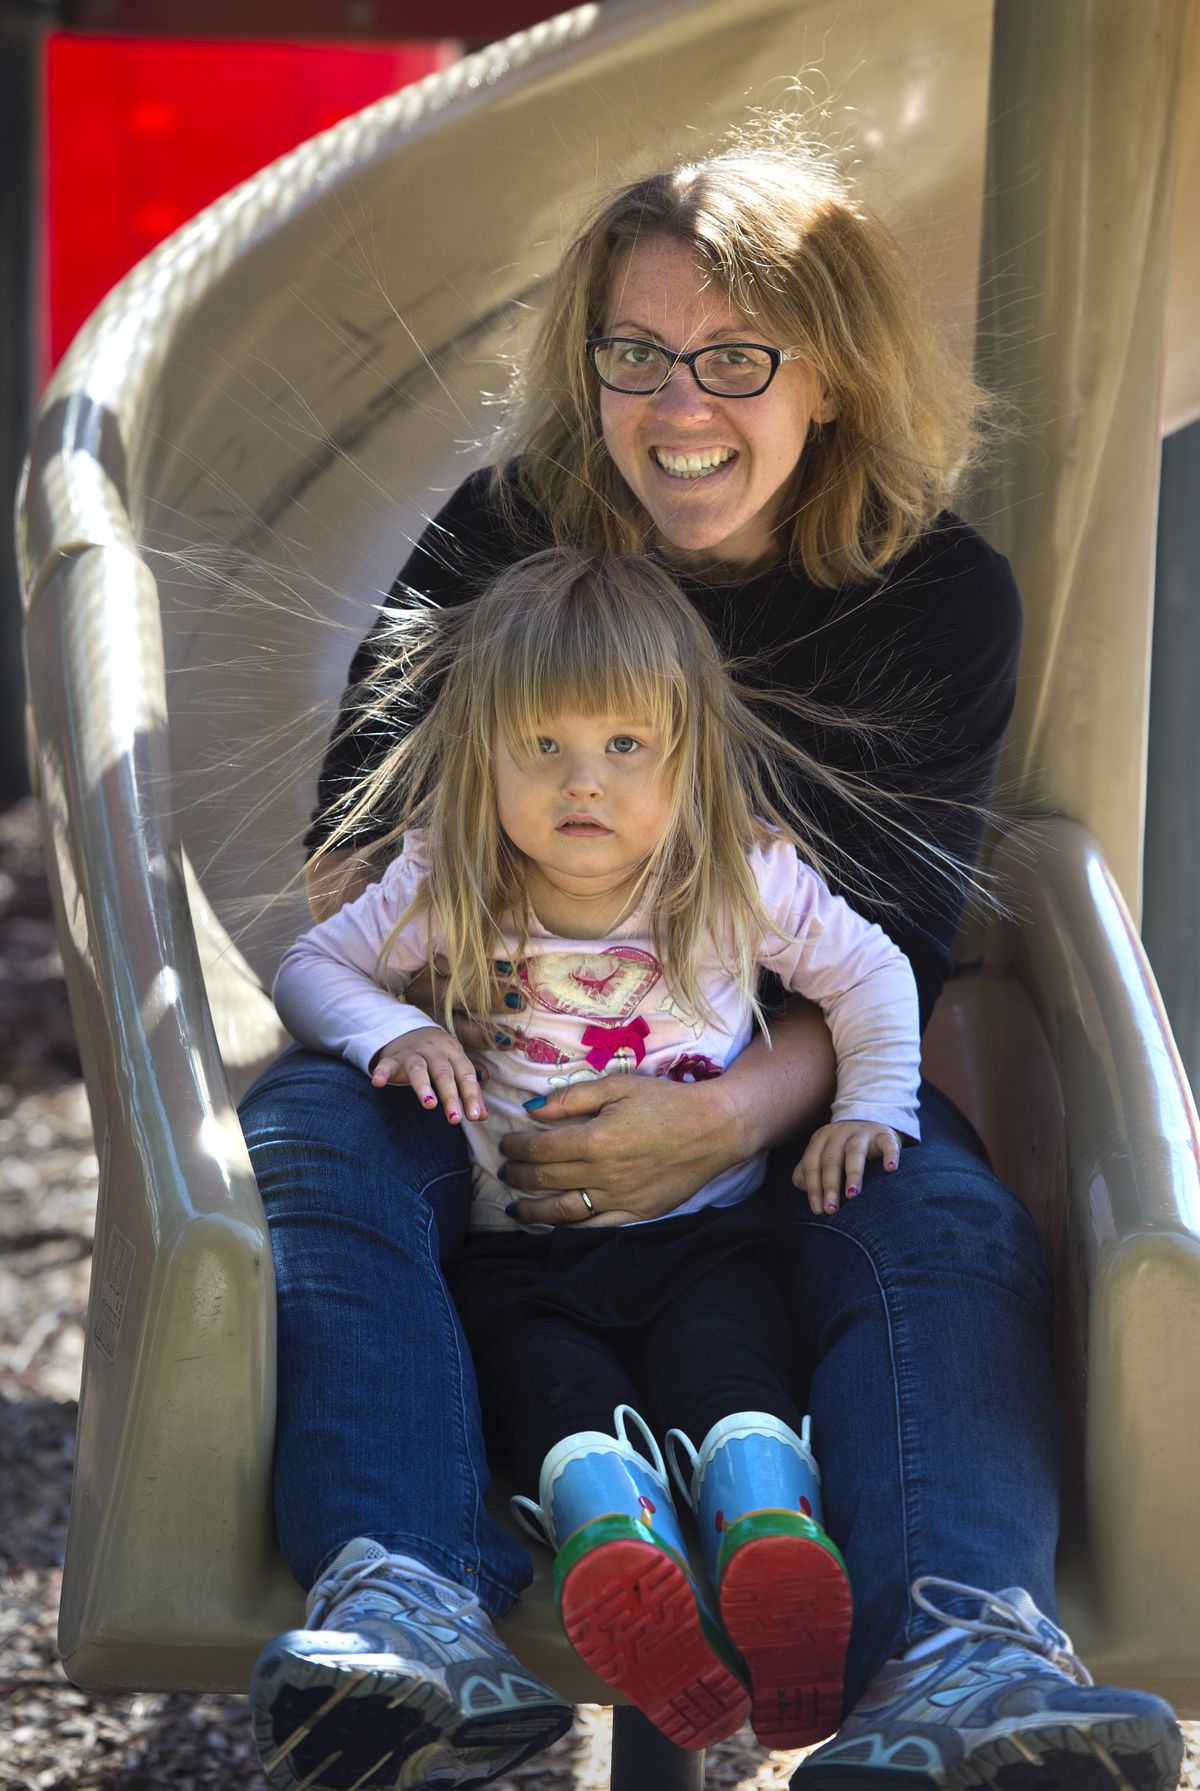 Now: Megan Steeber and her daughter Elsie have an electrifying time on the slide at Whittier Playground in west Spokane. (Dan Pelle)